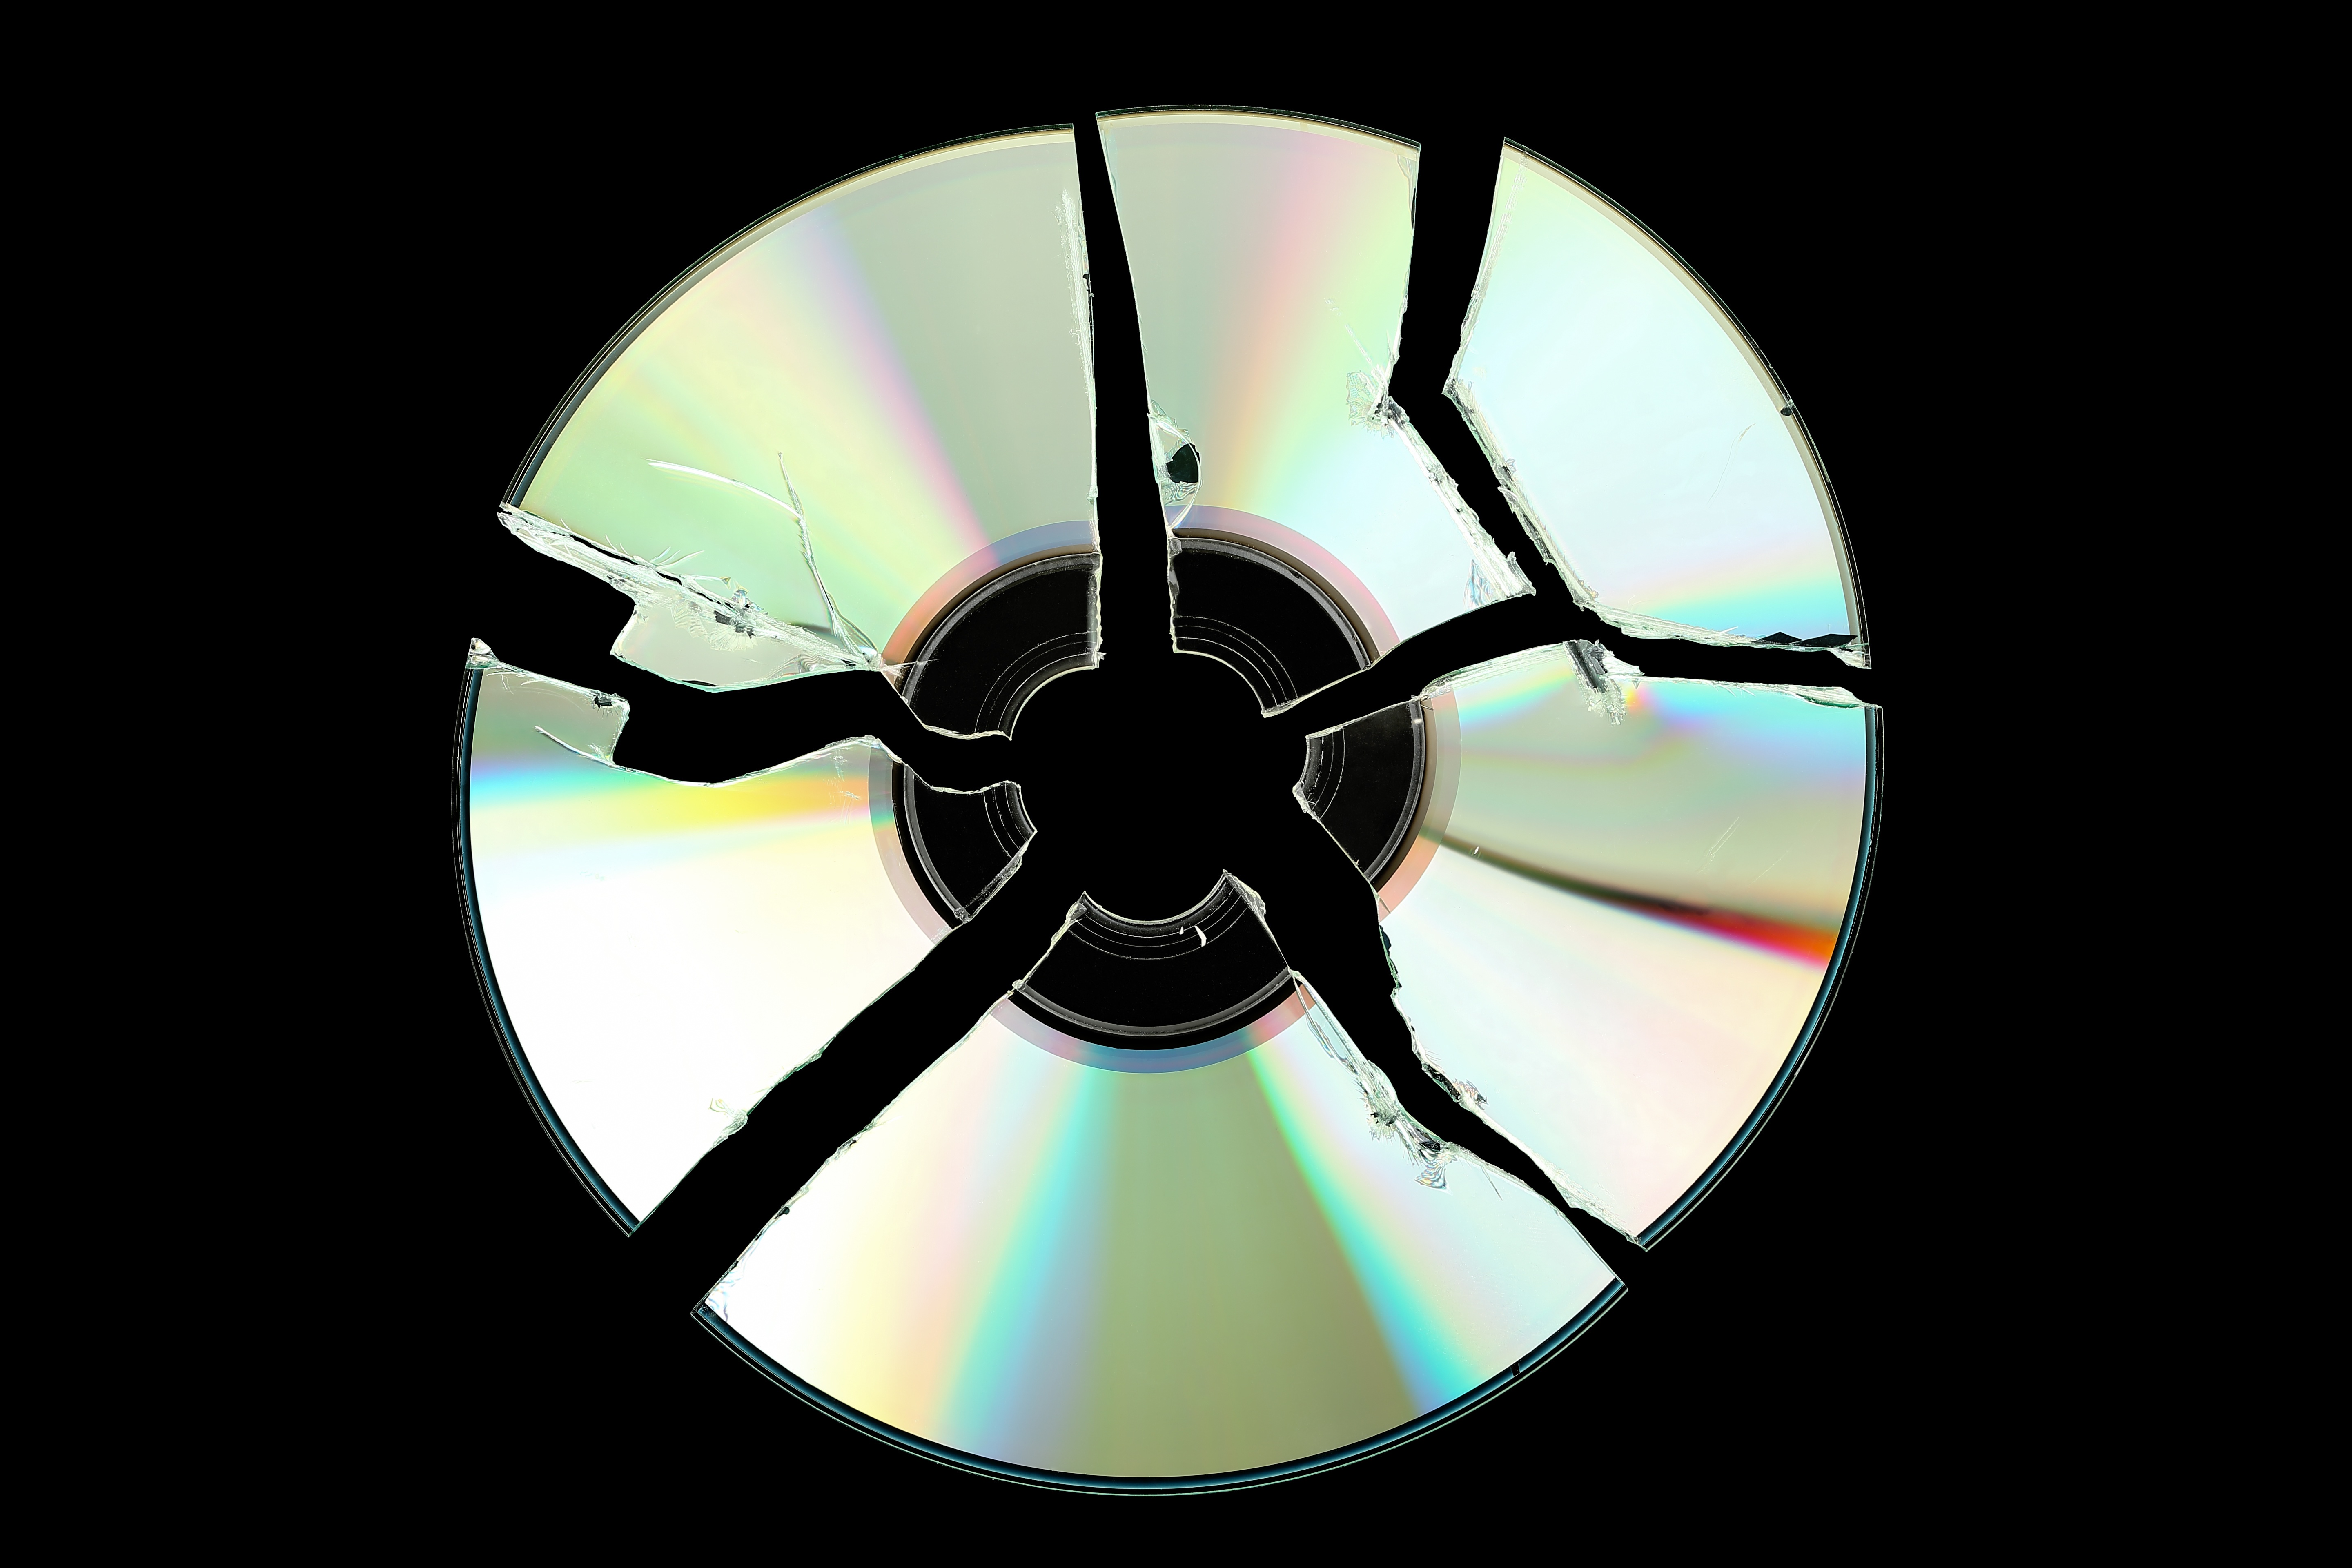 Goodbye CD-ROM, hello pay-as-you-go licensing